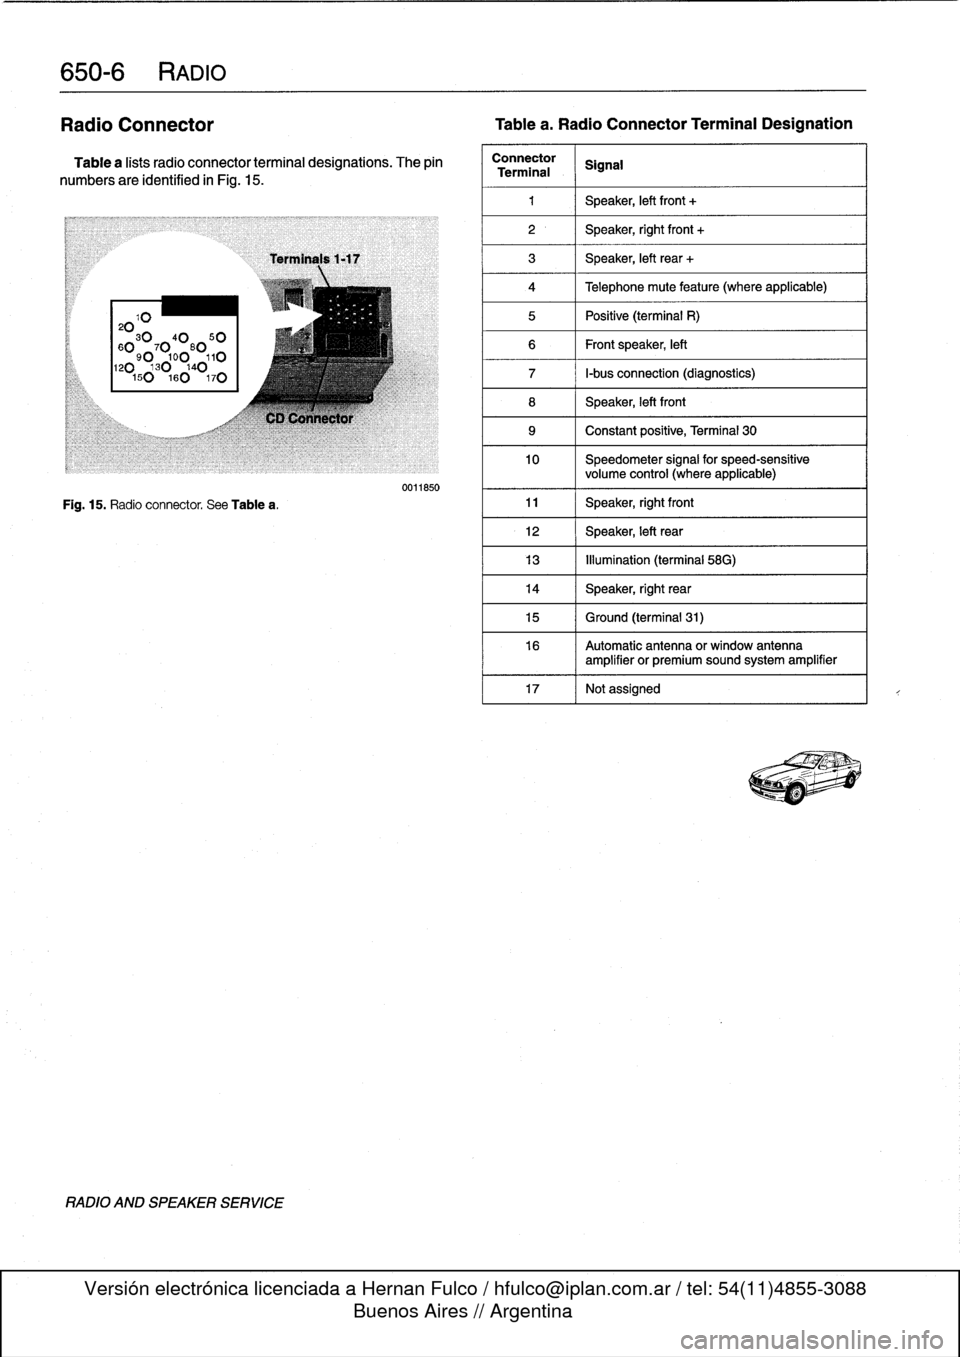 BMW 328i 1994 E36 Workshop Manual 
650-
6
RADIO

Radio
Connector

	

Tablea
.
Radio
Connector
Terminal
Designation

Table
a
lists
radio
connector
terminal
designations
.
The
pin

numbers
are
identified
in
Fig
.
15
.

20103040
50

60
9